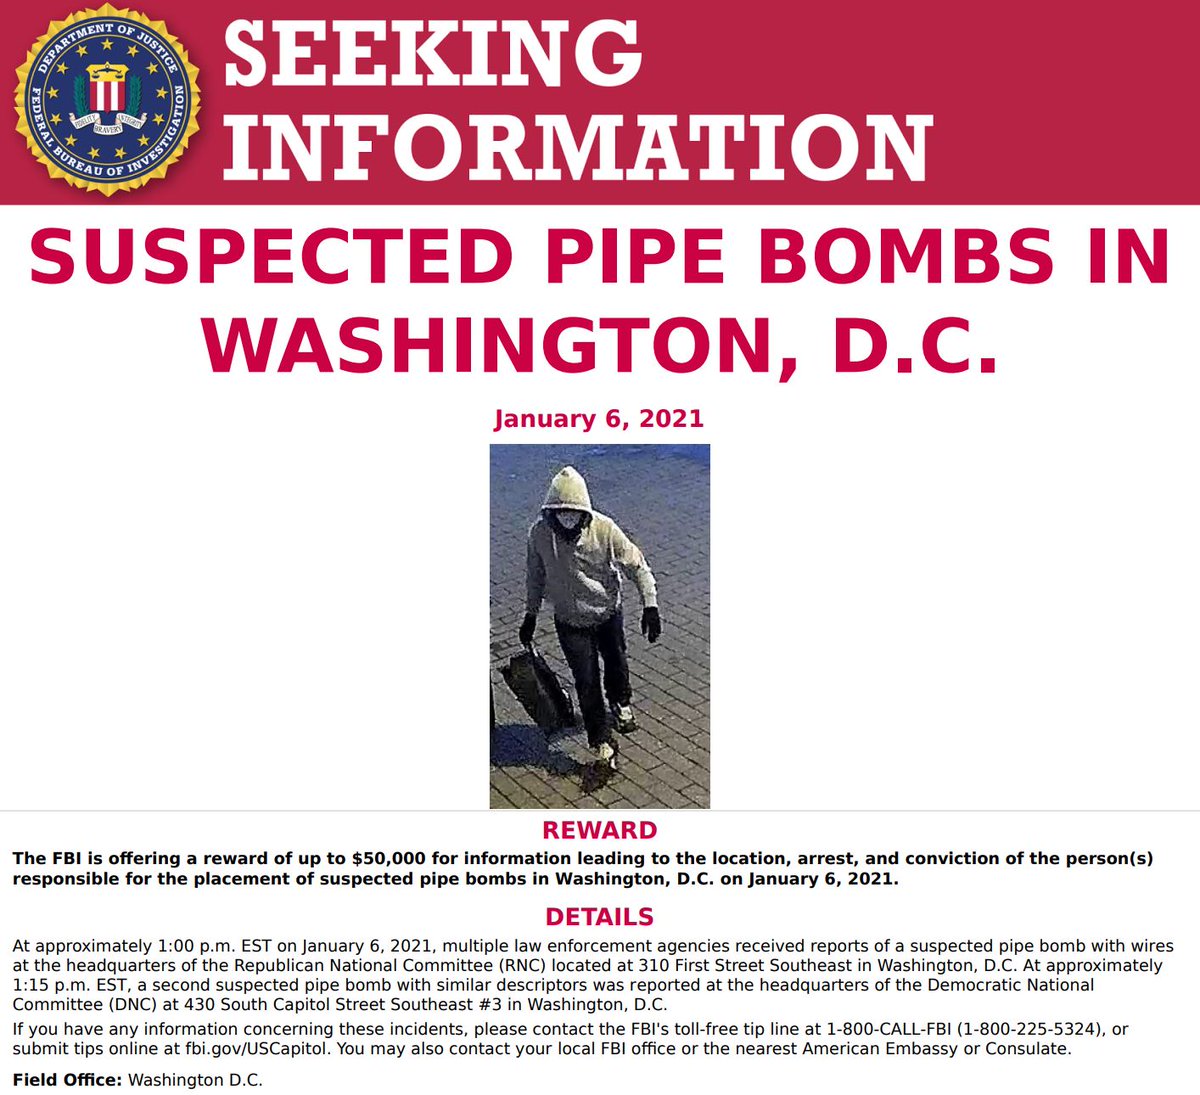 #FBIWFO needs your help & we are offering a reward of up to $50K for info leading to the location, arrest & conviction of the person(s) responsible for the pipe bombs found in DC on Jan. 6.